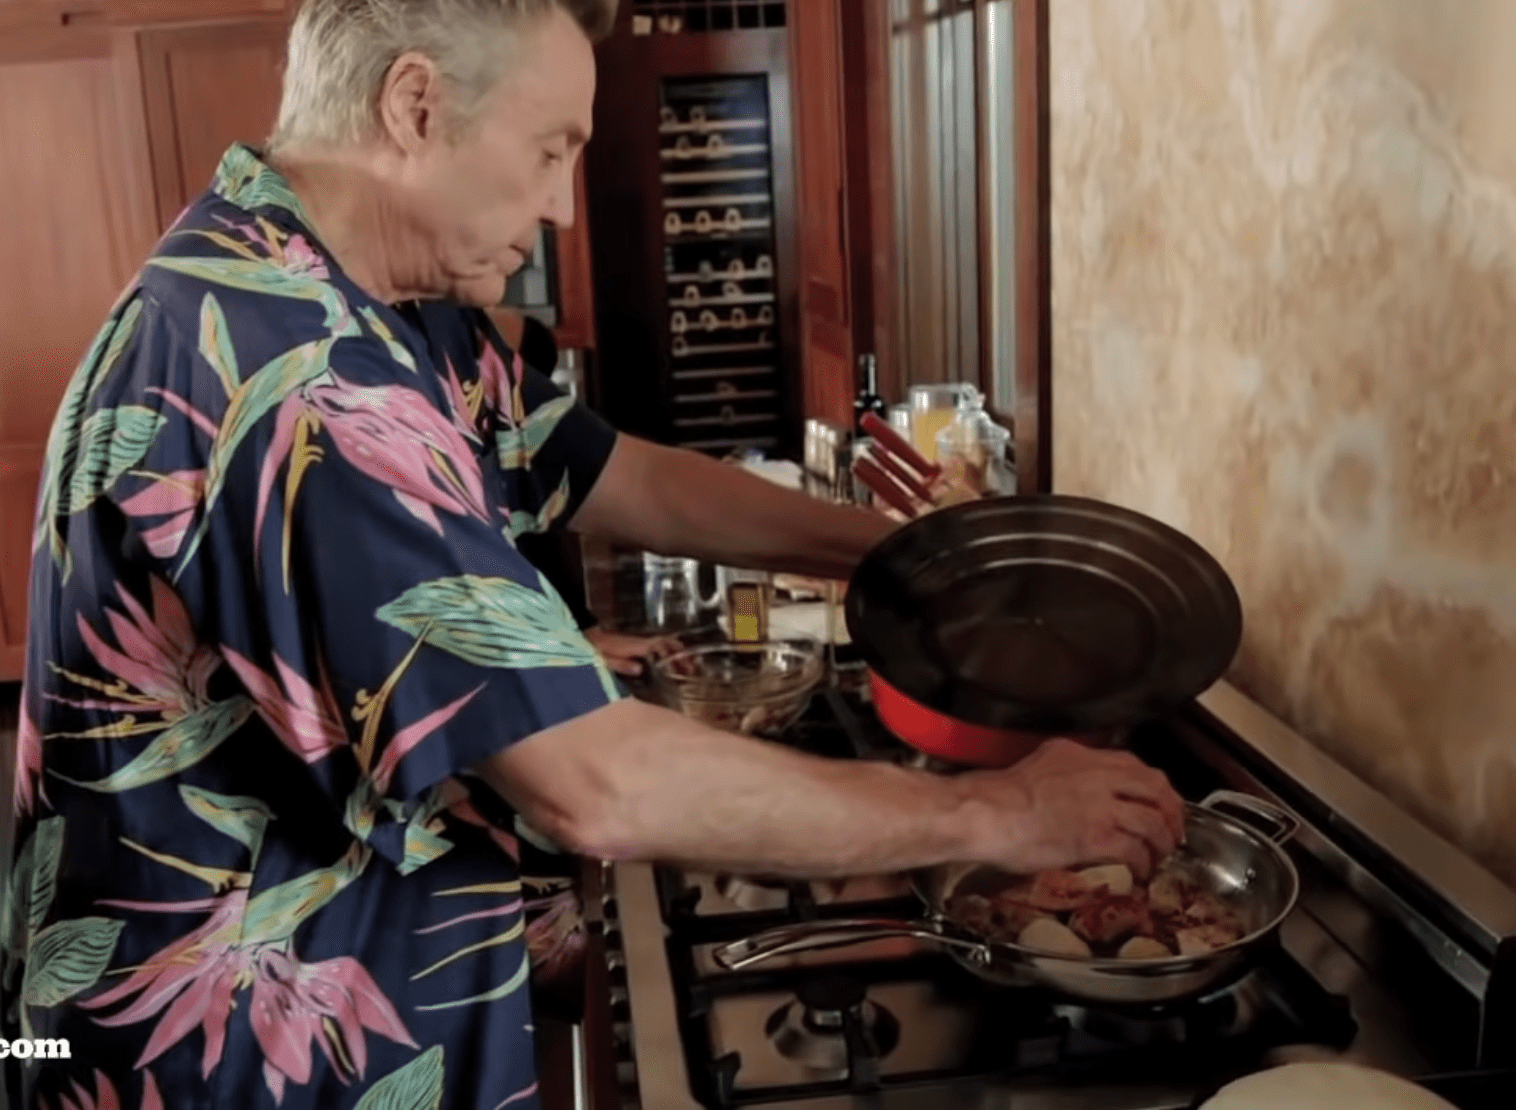 Christopher Walken cooking at his Connecticut house, 2012 | Source: www.youtube.com/c/FunnyOrDie